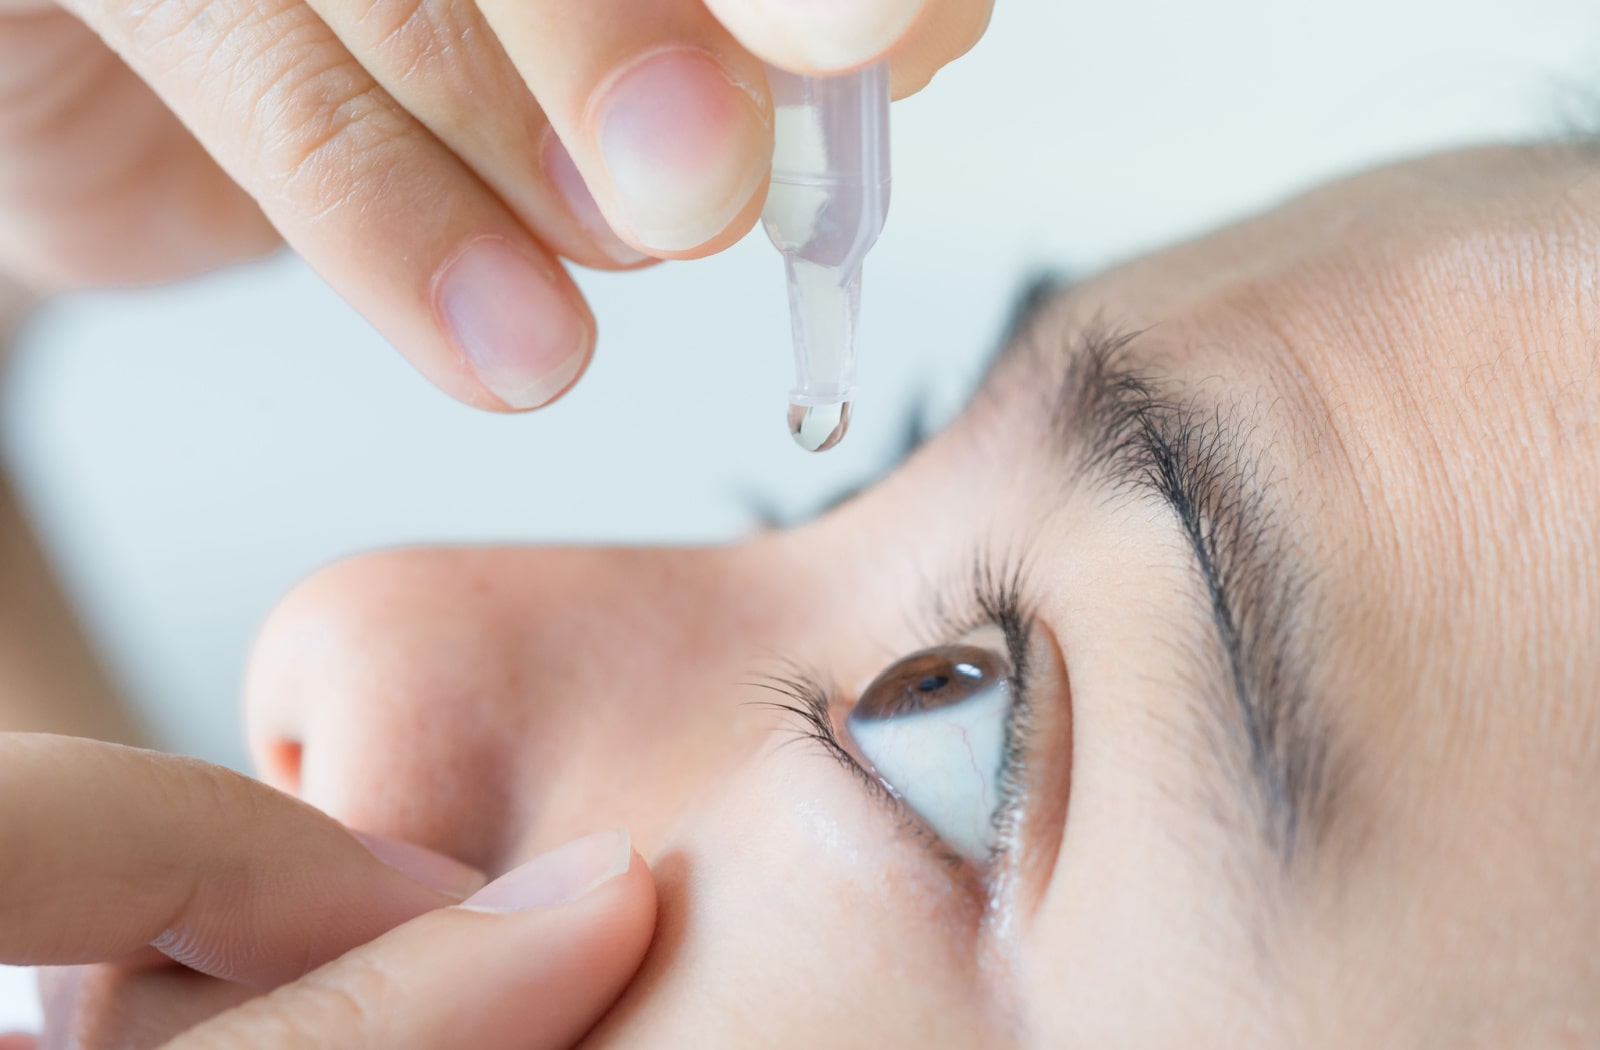 Close-up side view of a person's left eye as they hold their eye open and apply eye drops